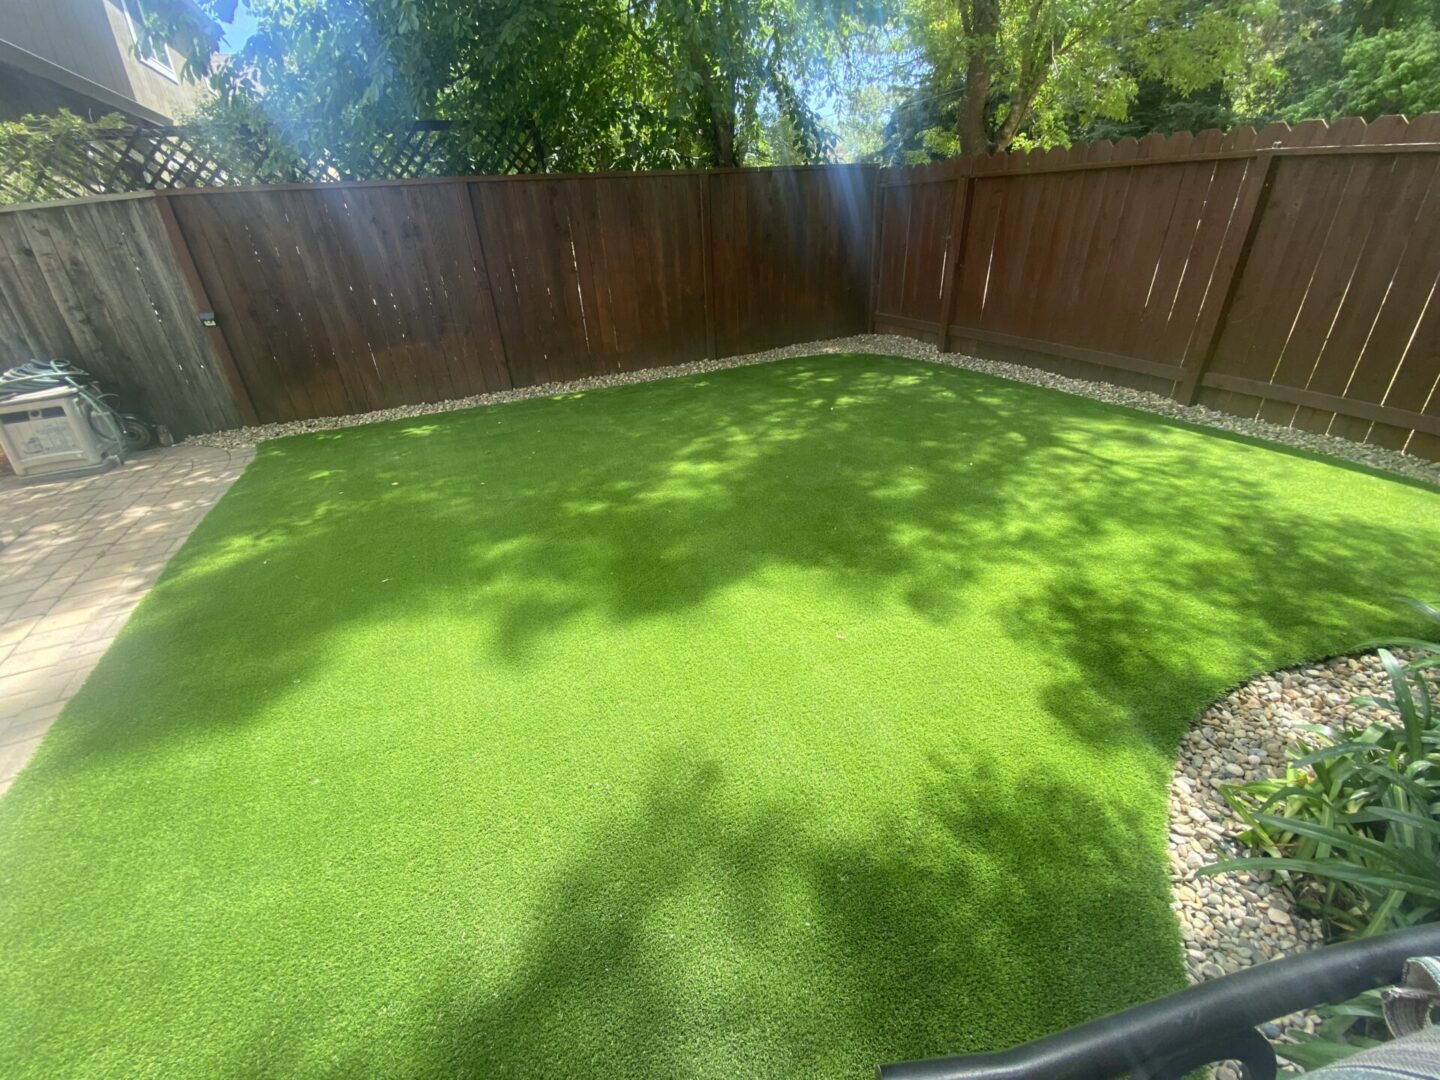 Artificial grass, tiles, pebbles, vegetation, landscaping by Guys Yard Design in Sonoma, CA